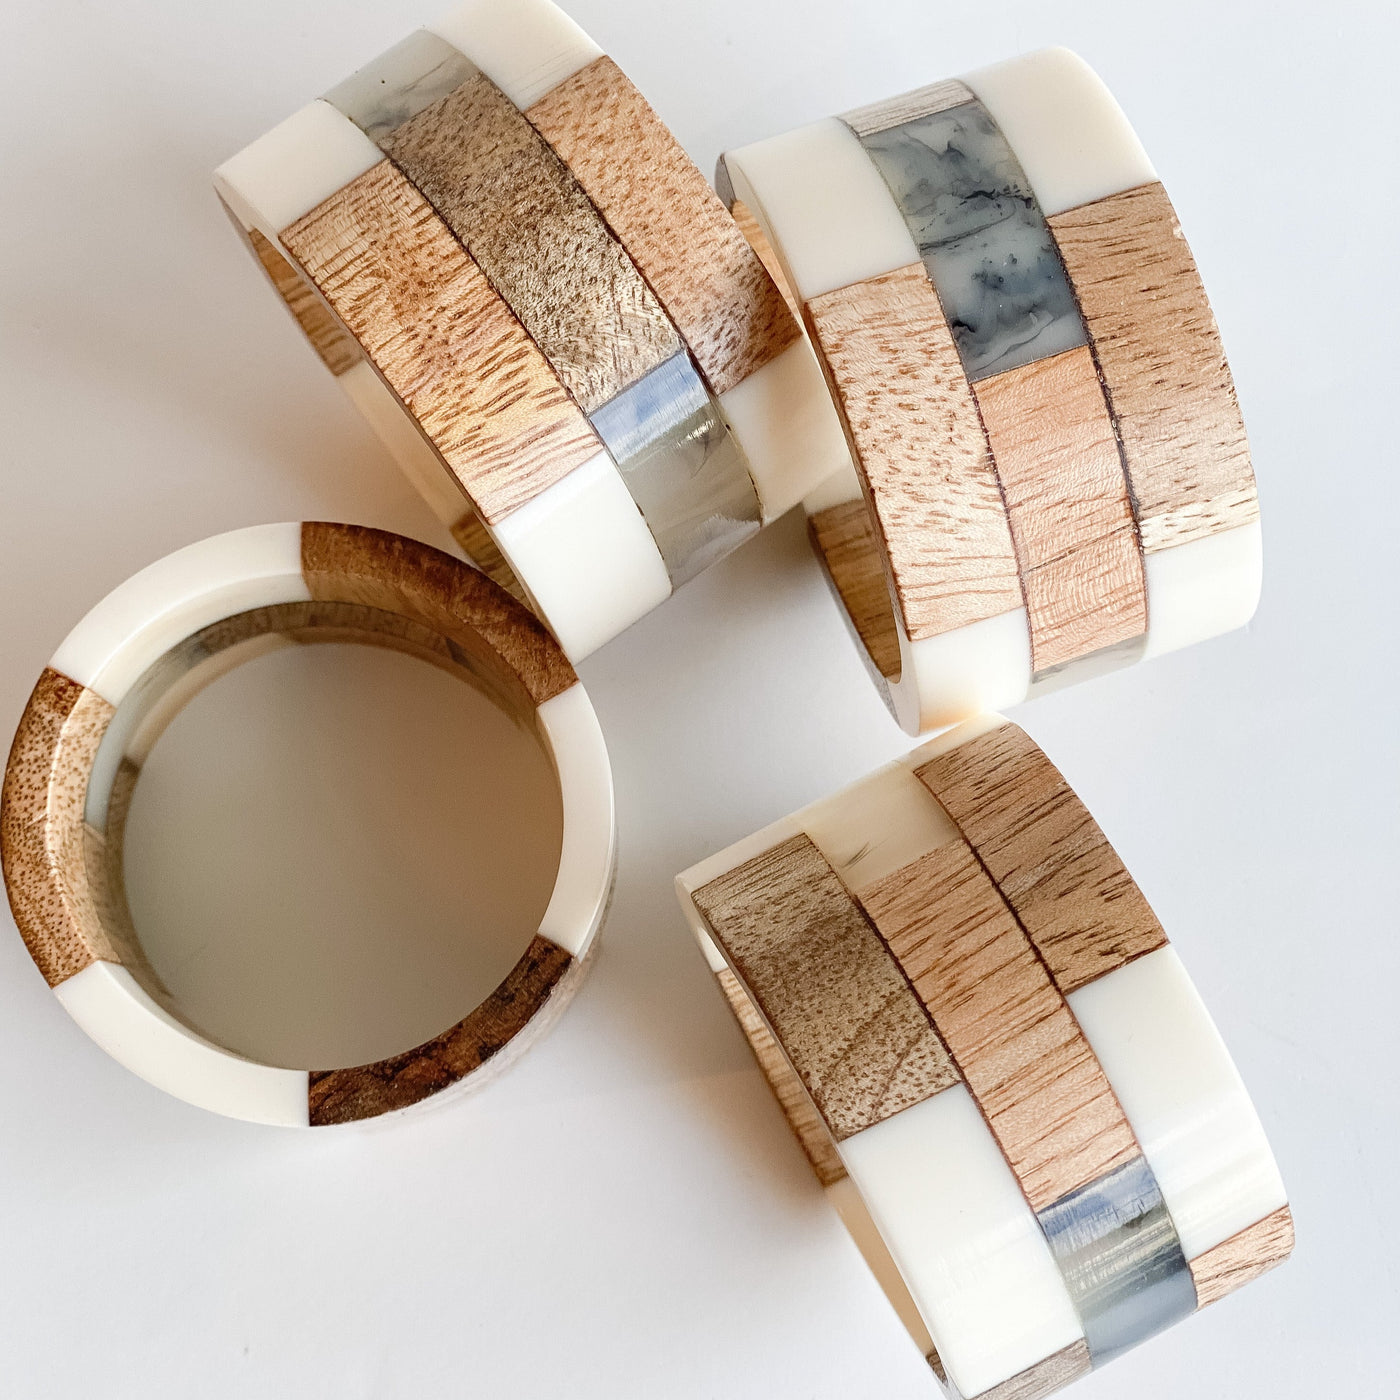 Mango Wood Napkin Rings - Set of Four - Danshire Market and Design , natural elements to your dining table with these circular Mango Wooden Segments + Resin Napkin Rings. 